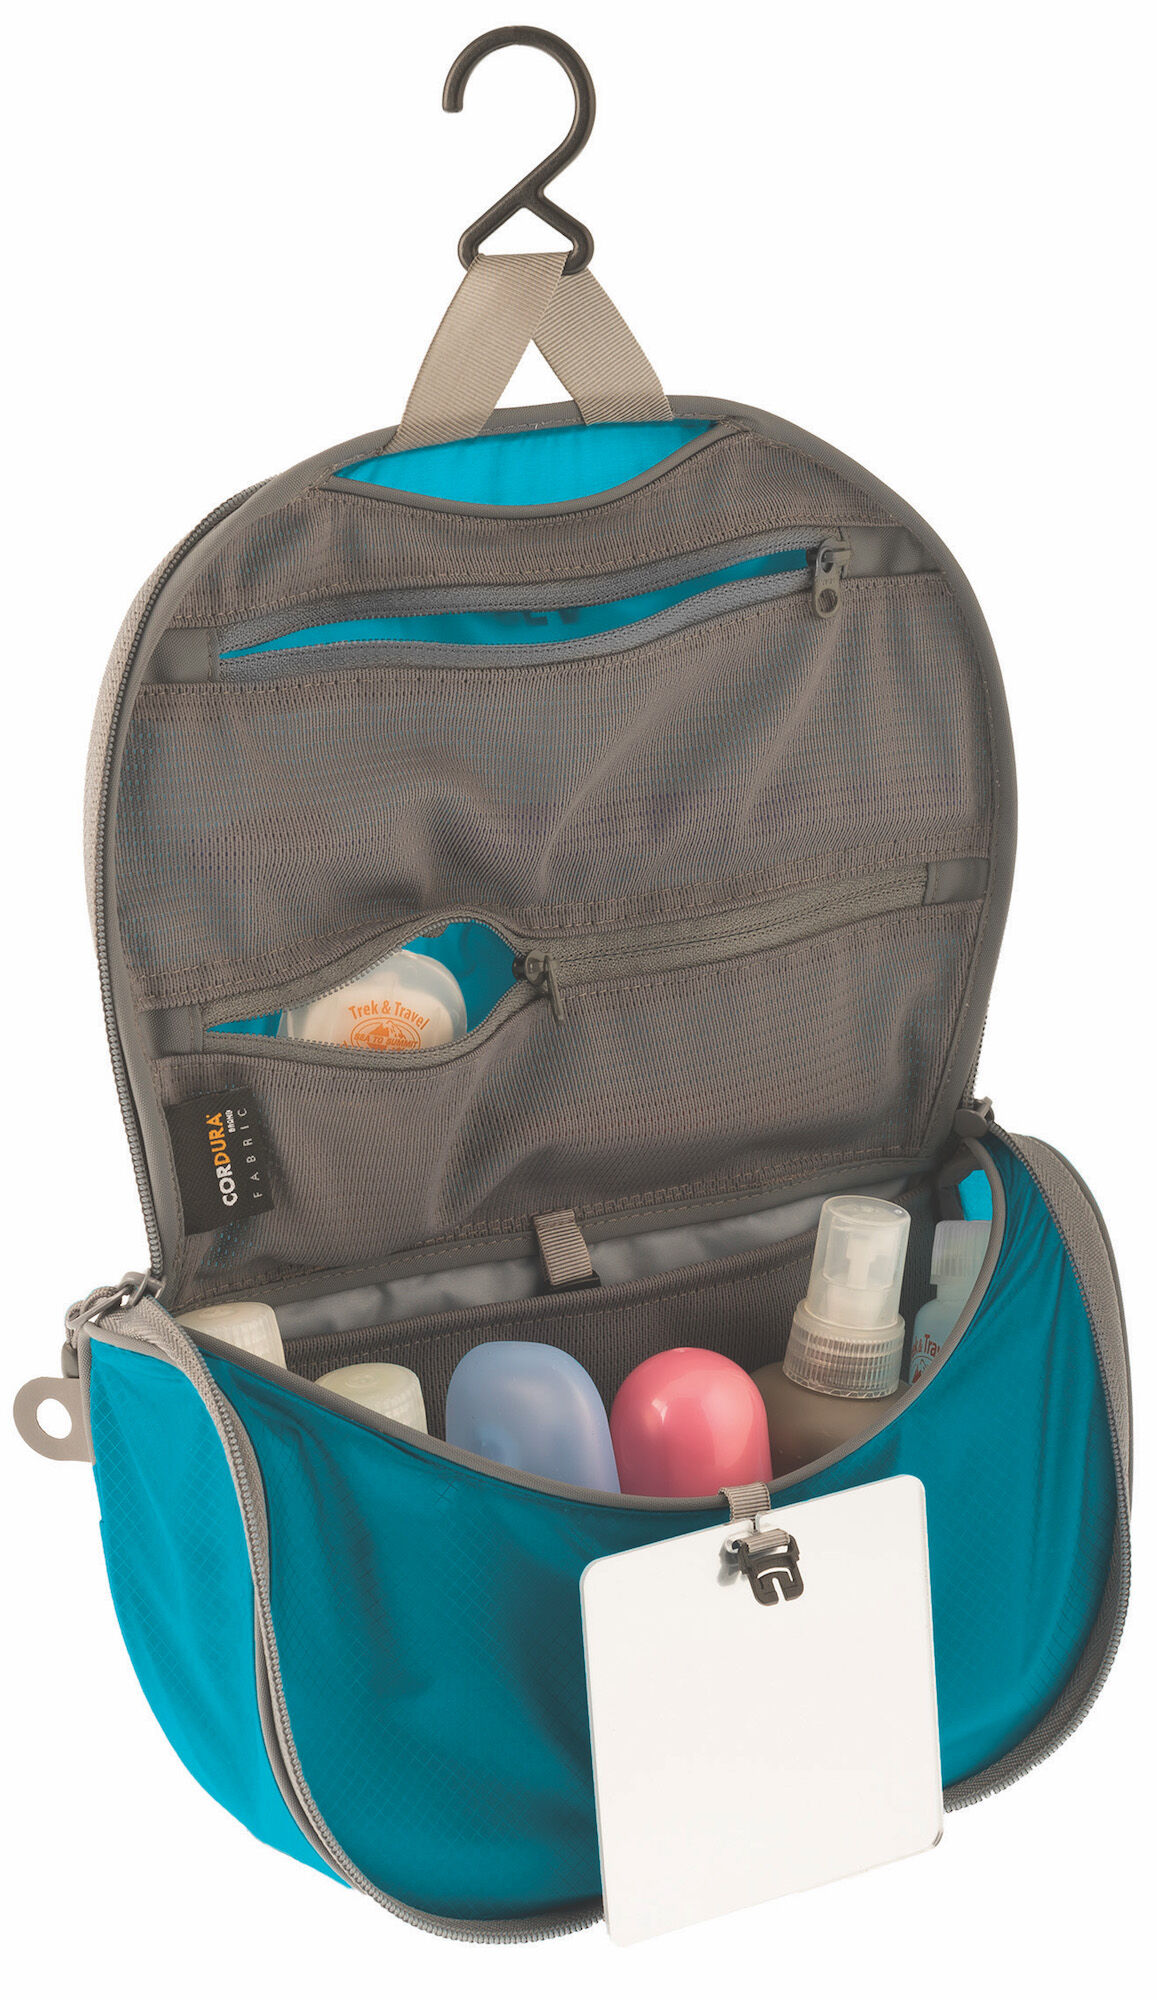 Sea To Summit - Hanging Toiletry Bag - Wash bags